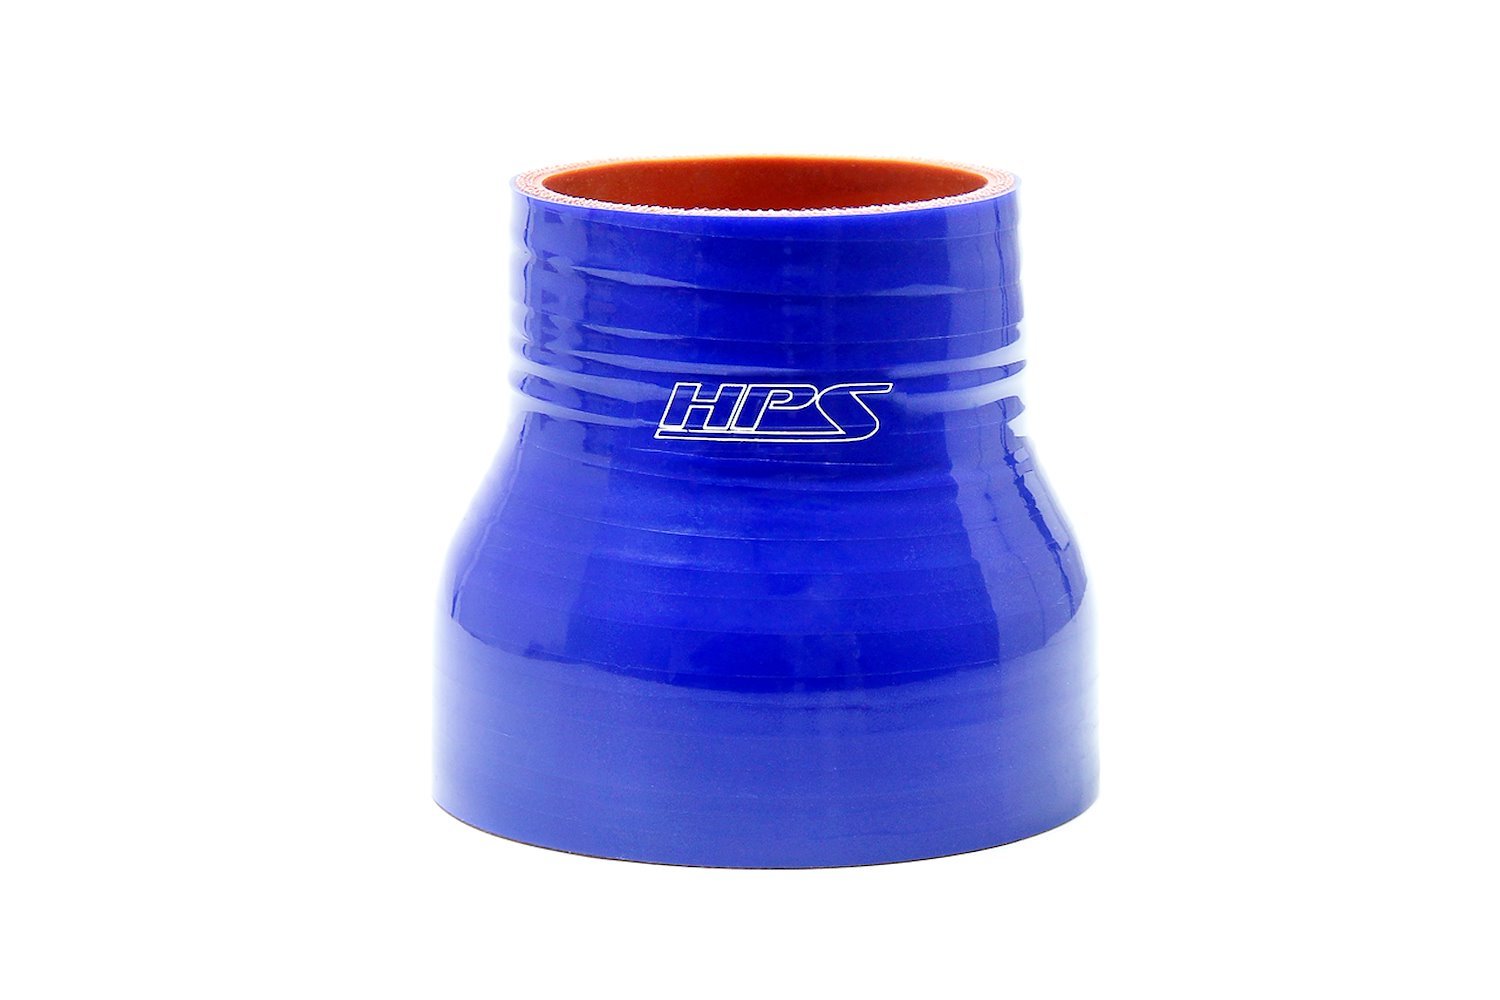 HTSR-275-300-L4-BLUE Silicone Reducer Hose, High-Temp 4-Ply Reinforced, 2-3/4 in. - 3 in. ID, 4 in. Long, Blue